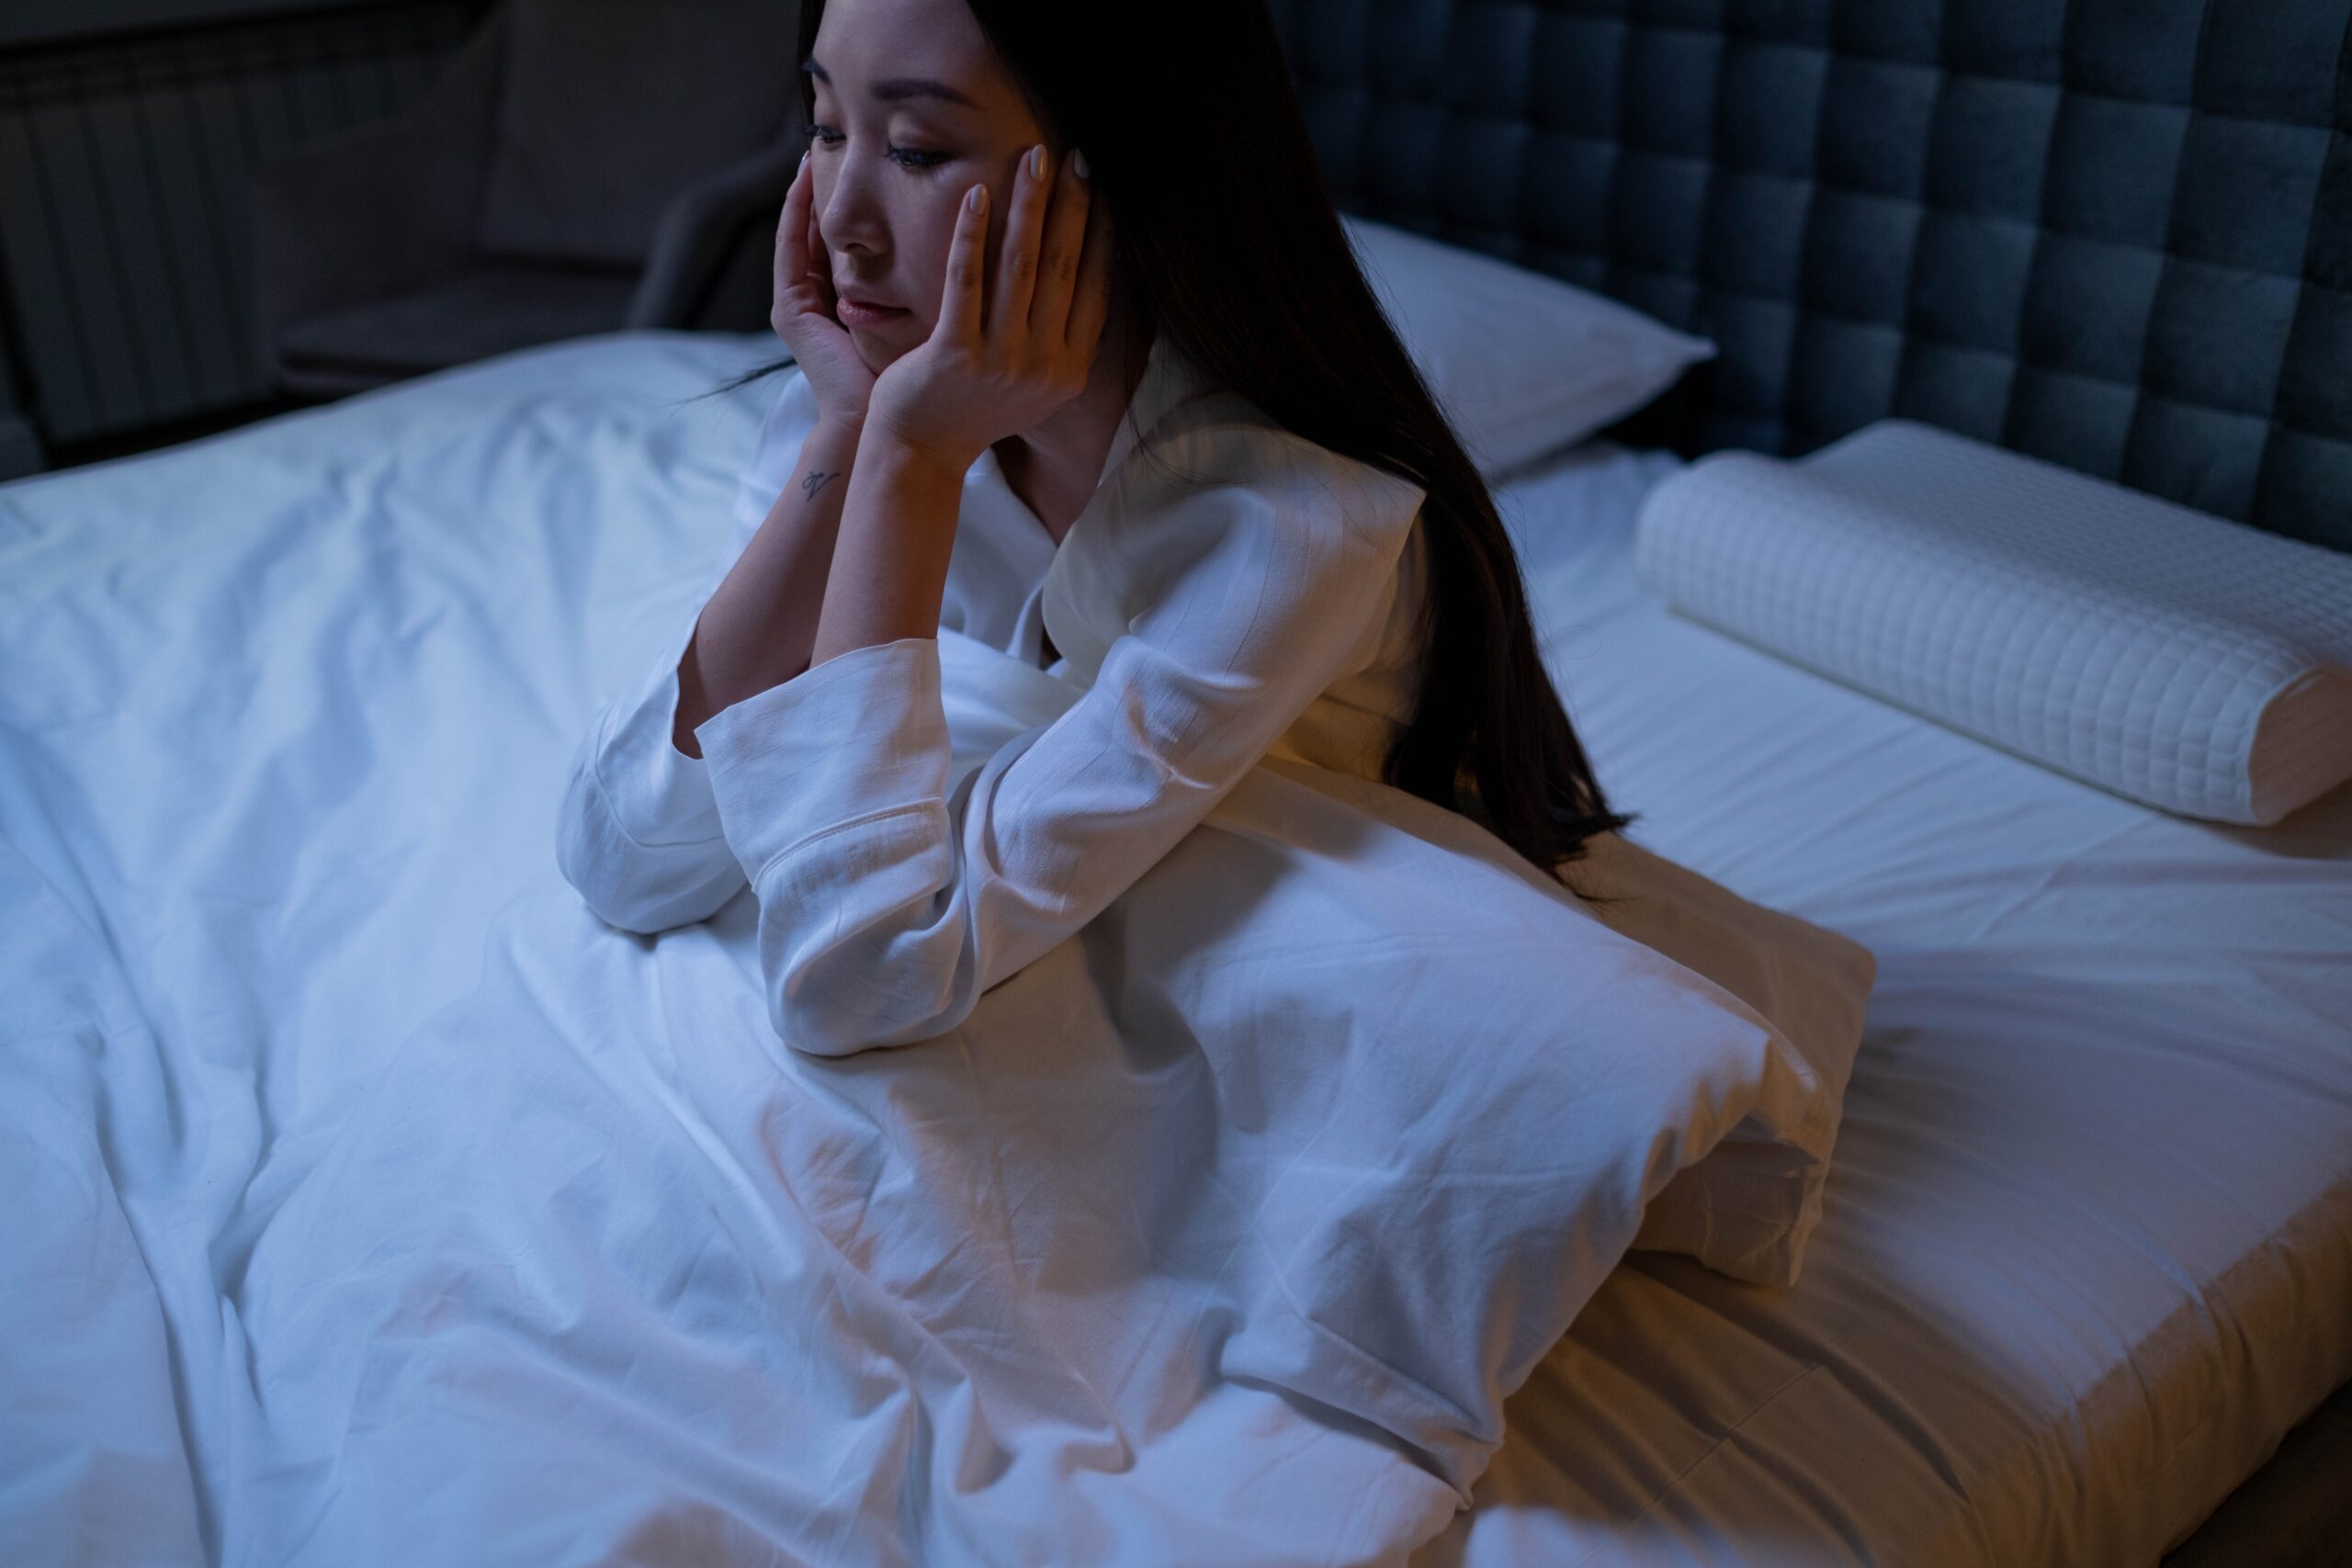 Woman wearing white long-sleeve shirt sitting on a bed at night